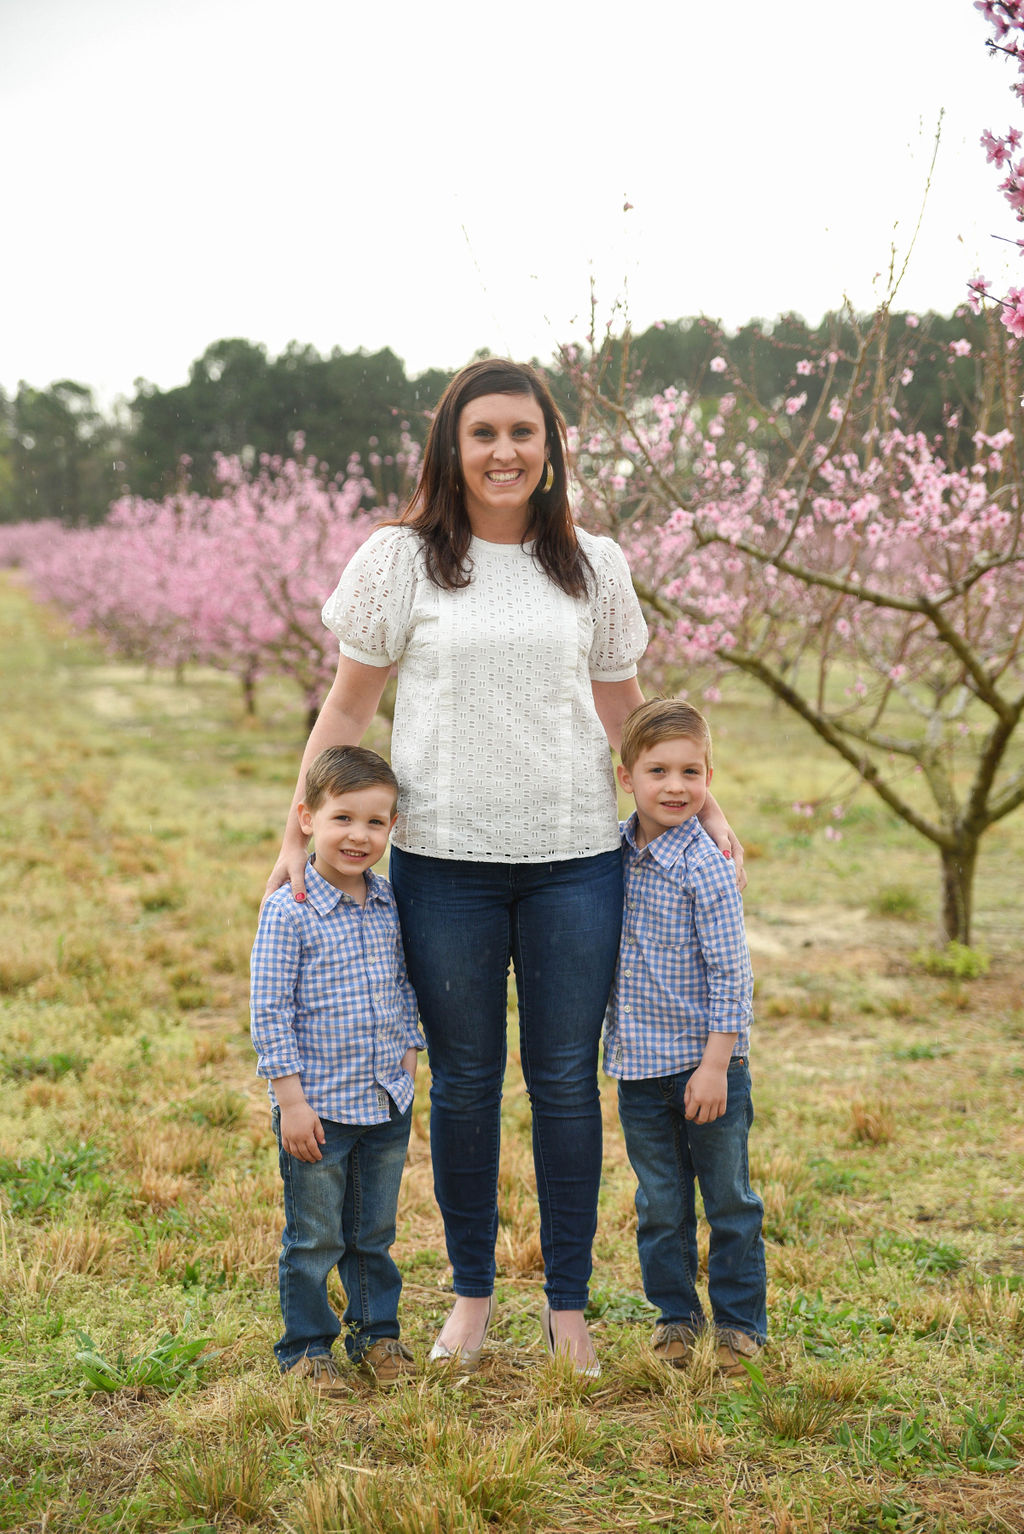 A mom with her two sons in a field.